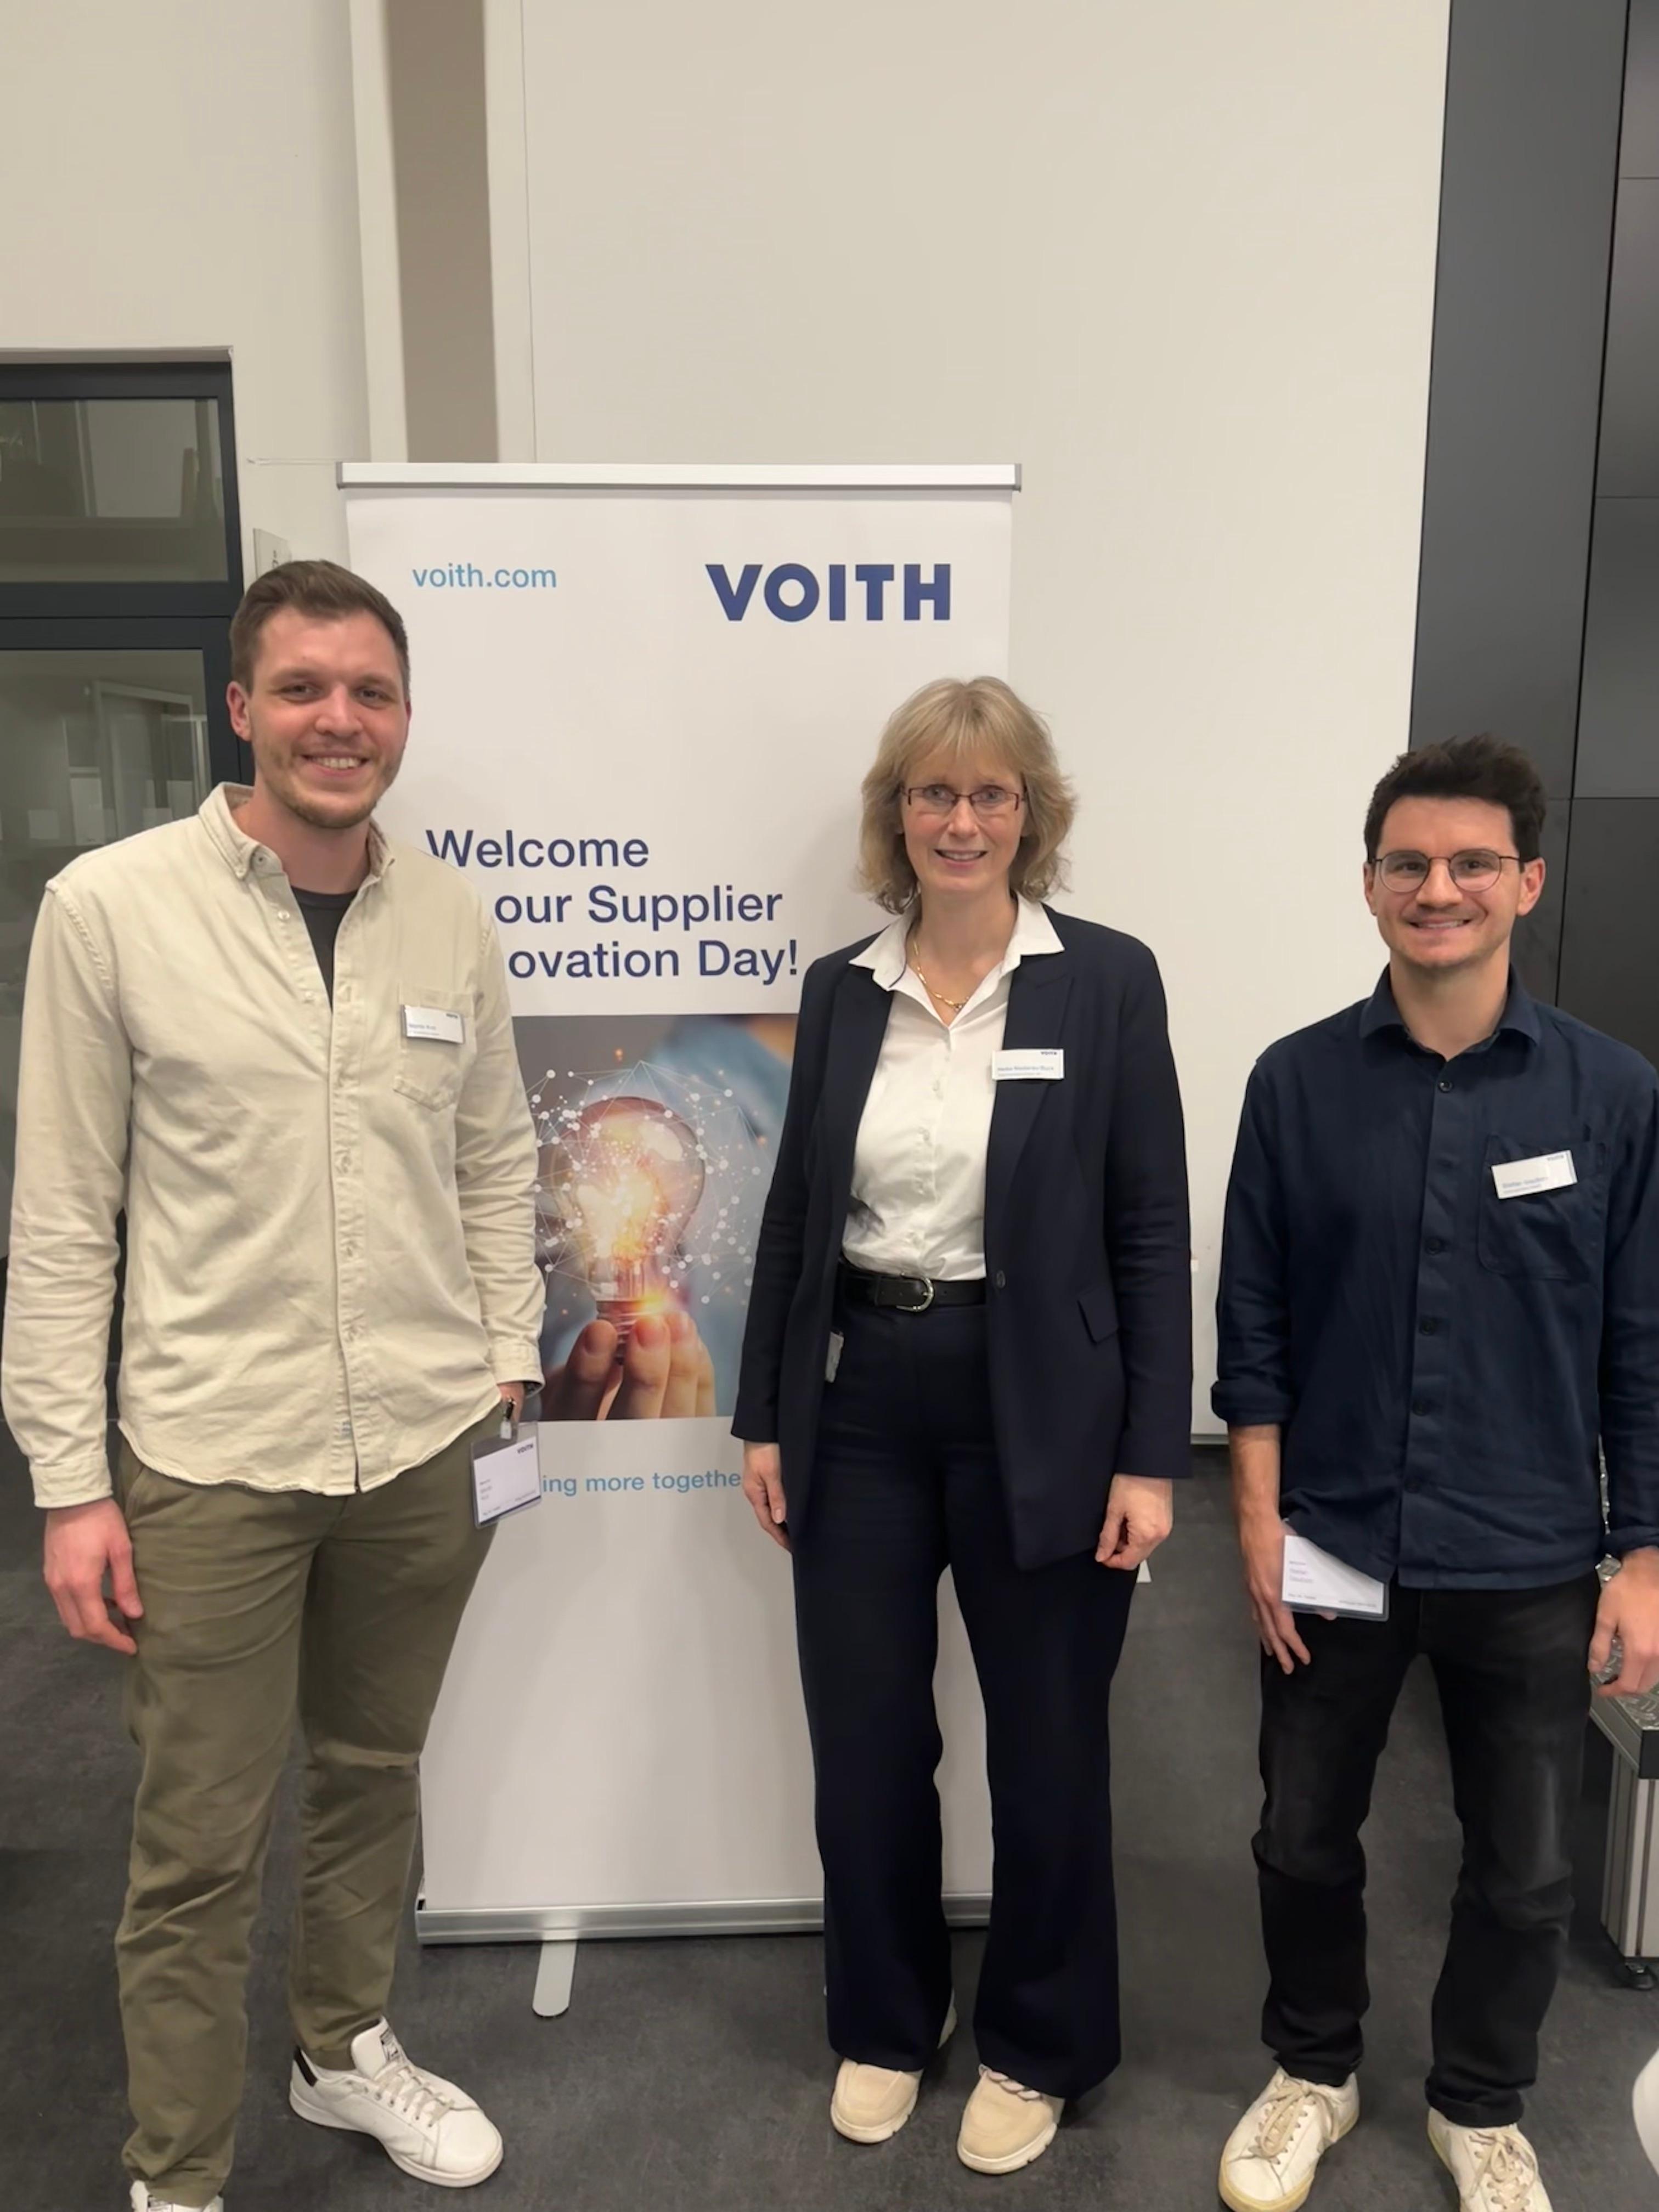 We were invited by Voith to the Supplier Innovation Day